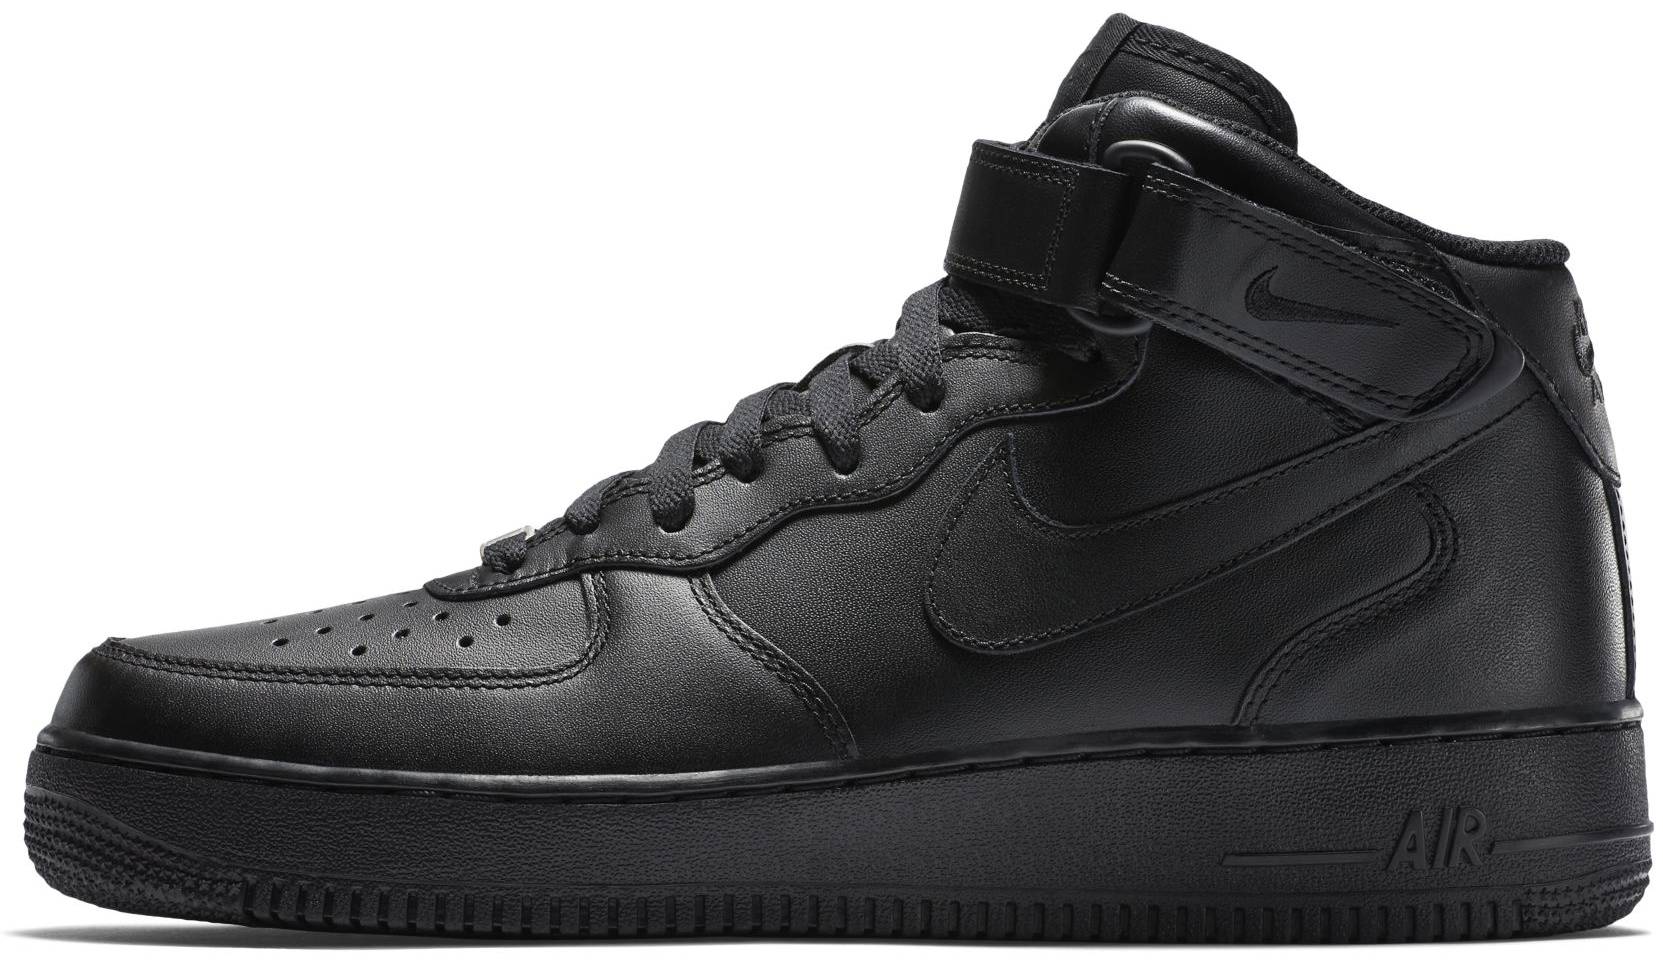 Save 34% on Nike Mid Top Sneakers (66 